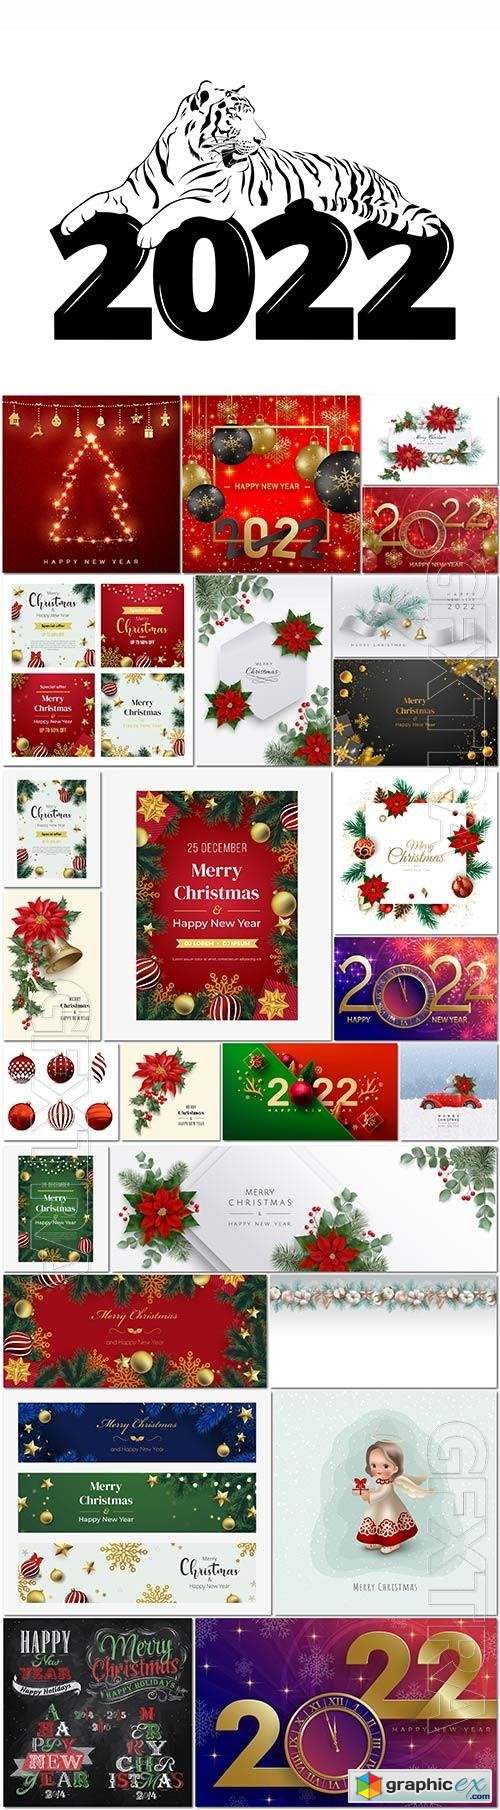  Christmas and New Year set in vector, Christmas toys, Santa, garlands, holiday decorations 